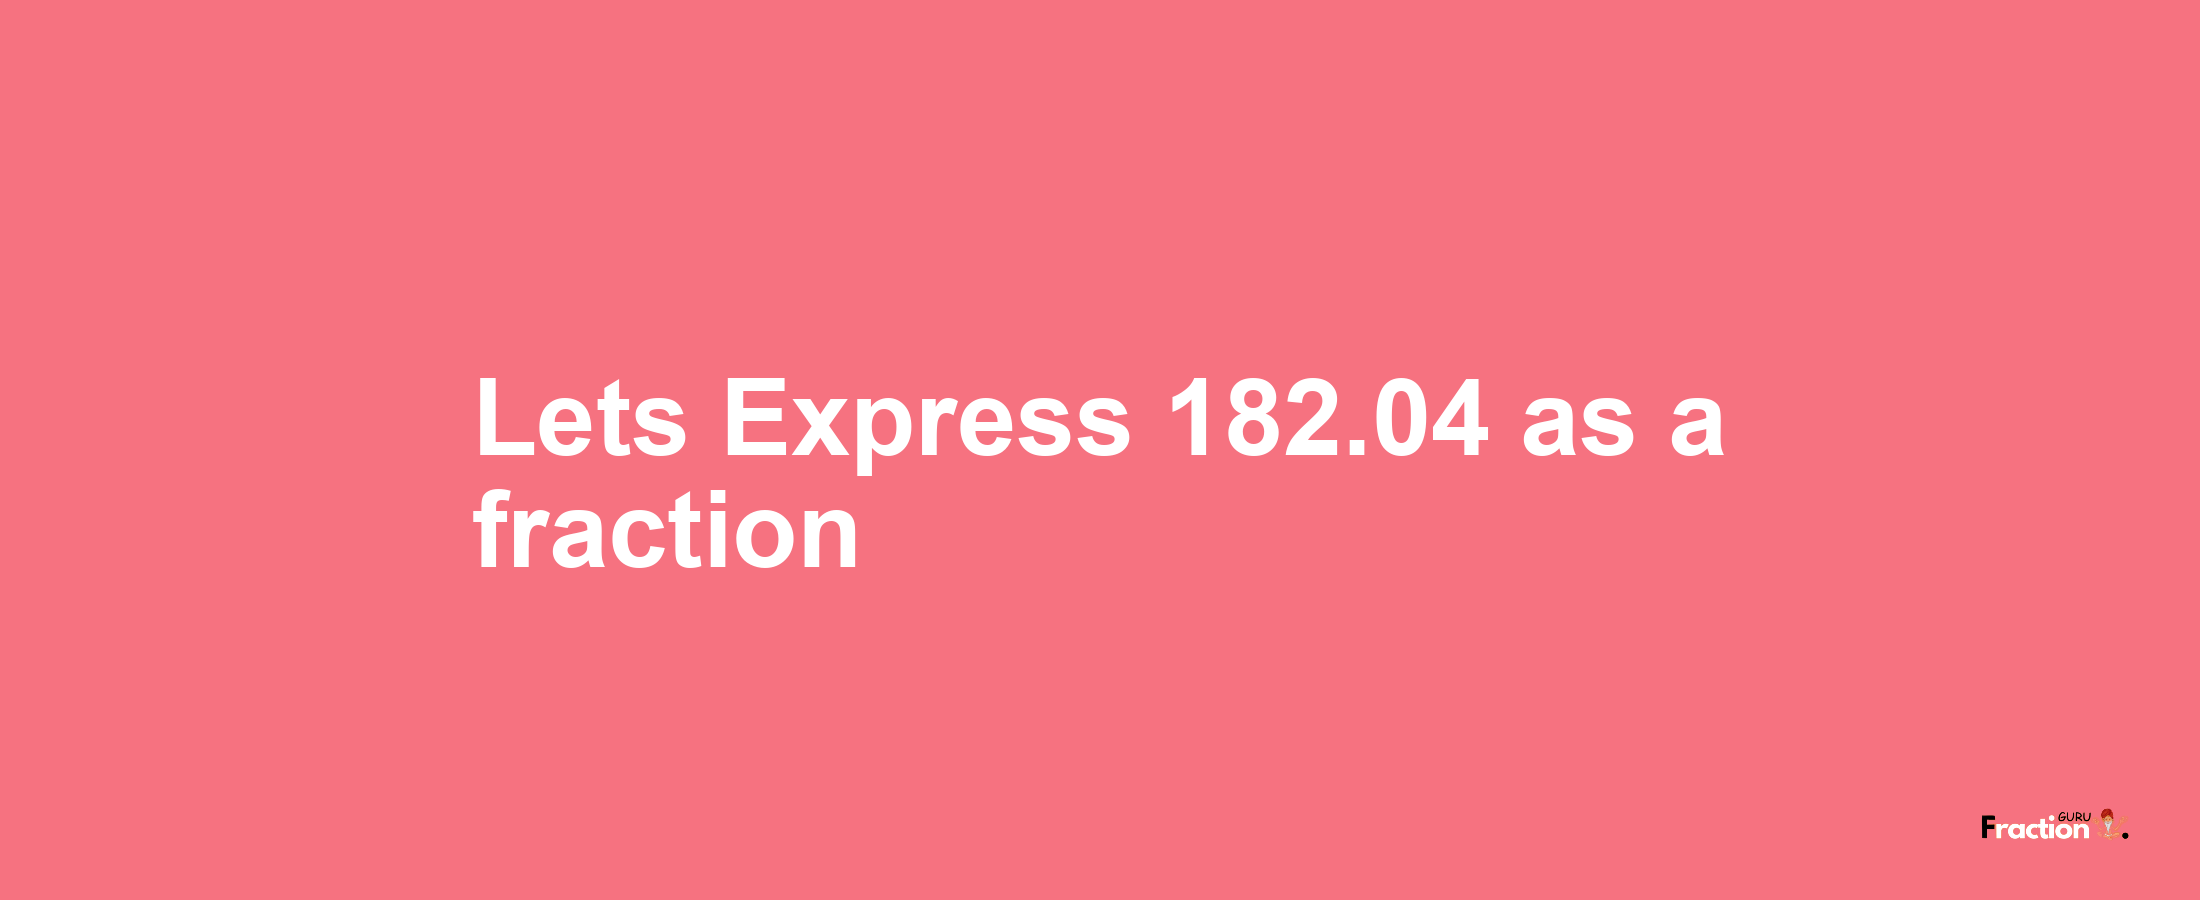 Lets Express 182.04 as afraction